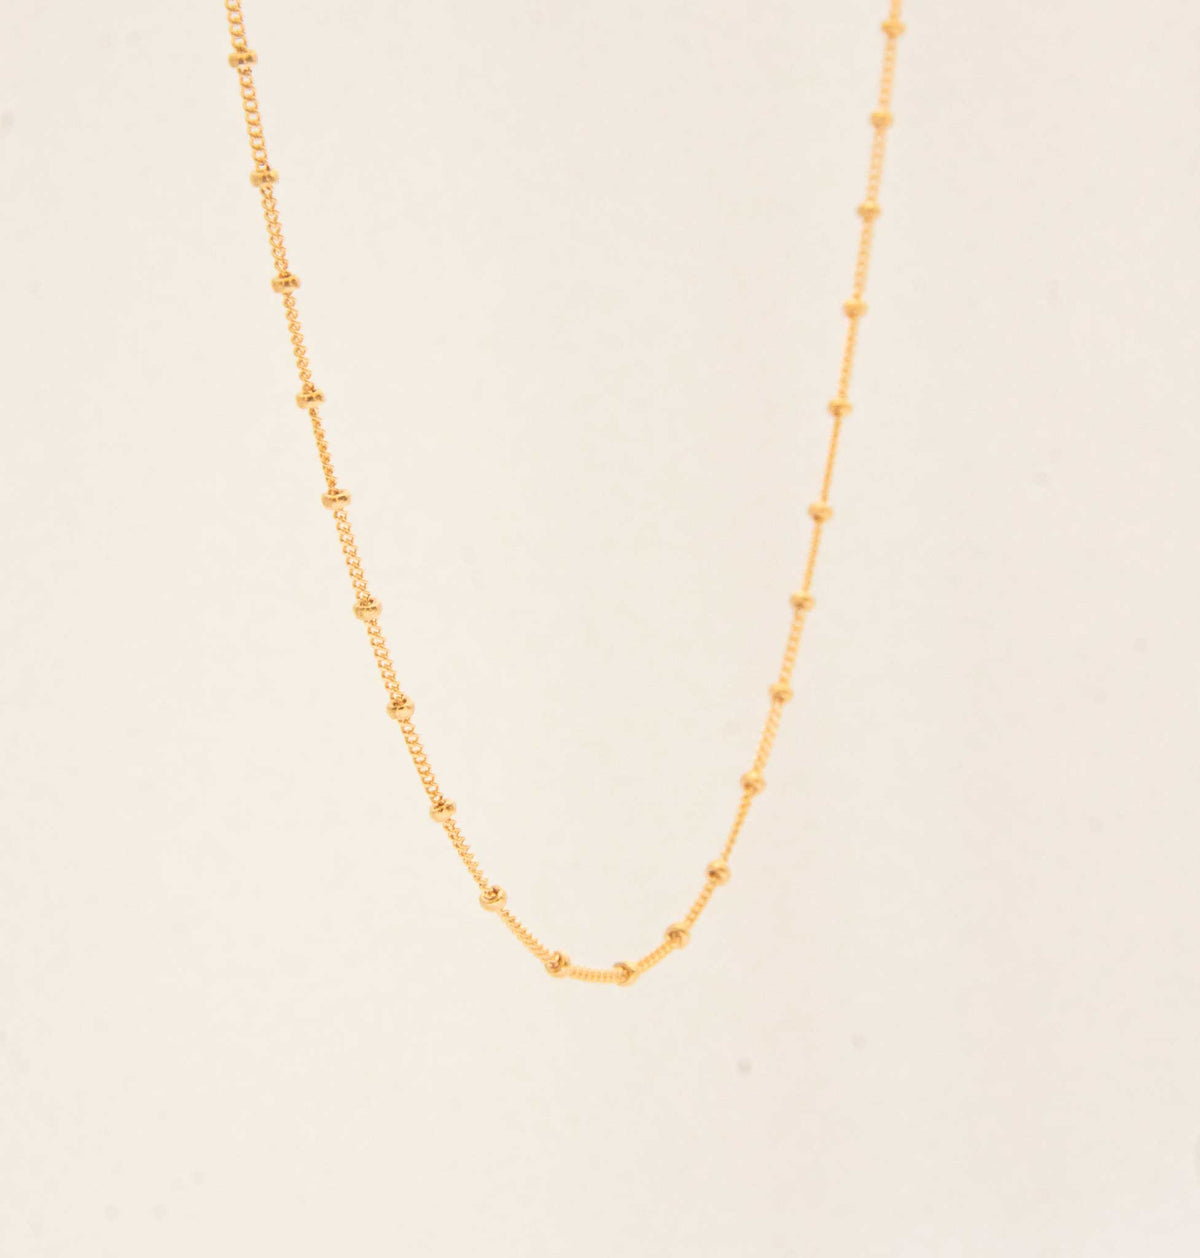 Half of the gold satellite chain hanging on a white solid background.